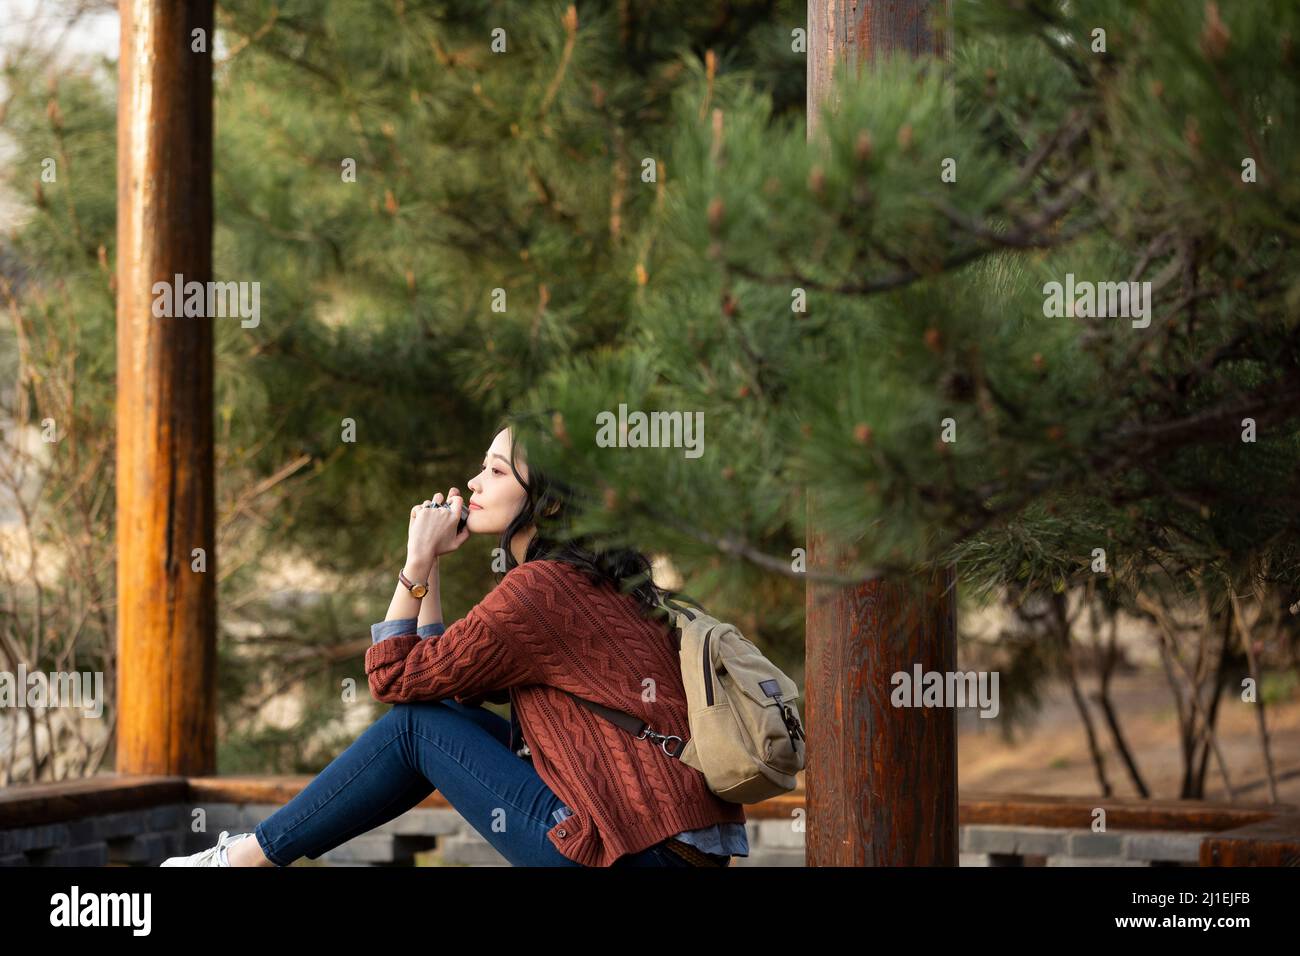 Female tourist resting in a park - stock photo Stock Photo